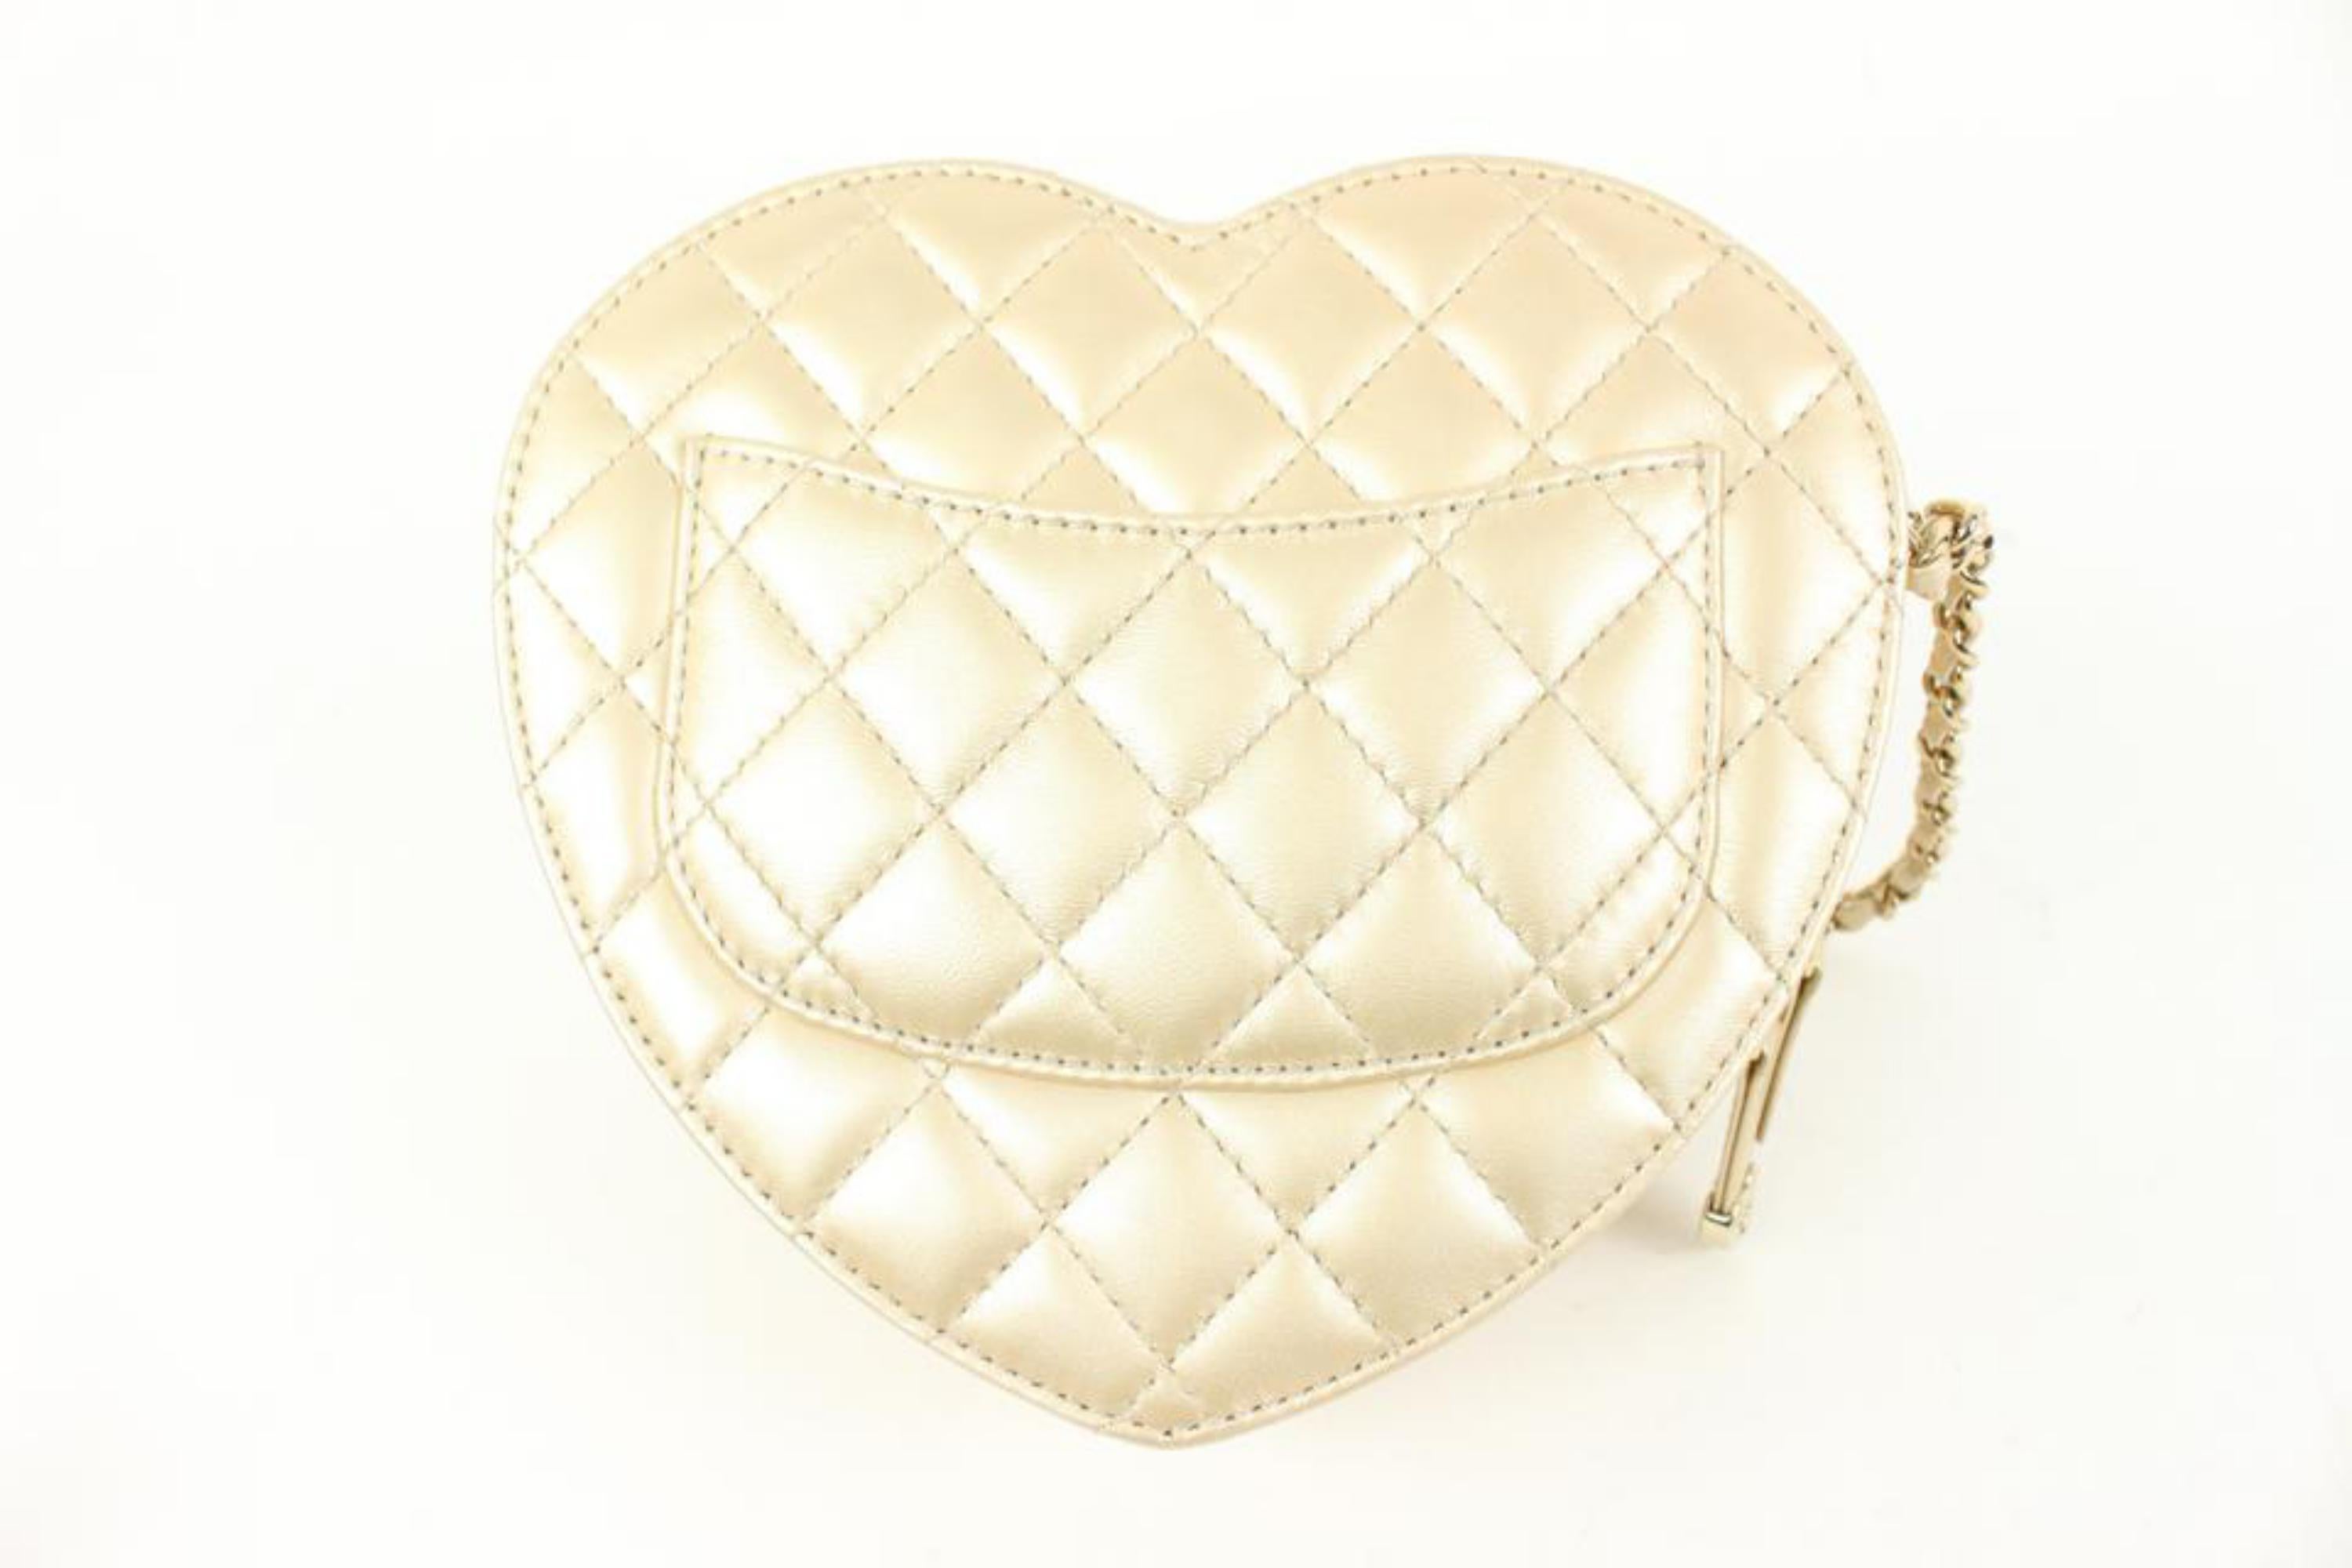 Women's Chanel Gold Quilted Lambskin Large Heart Bag 41ck60